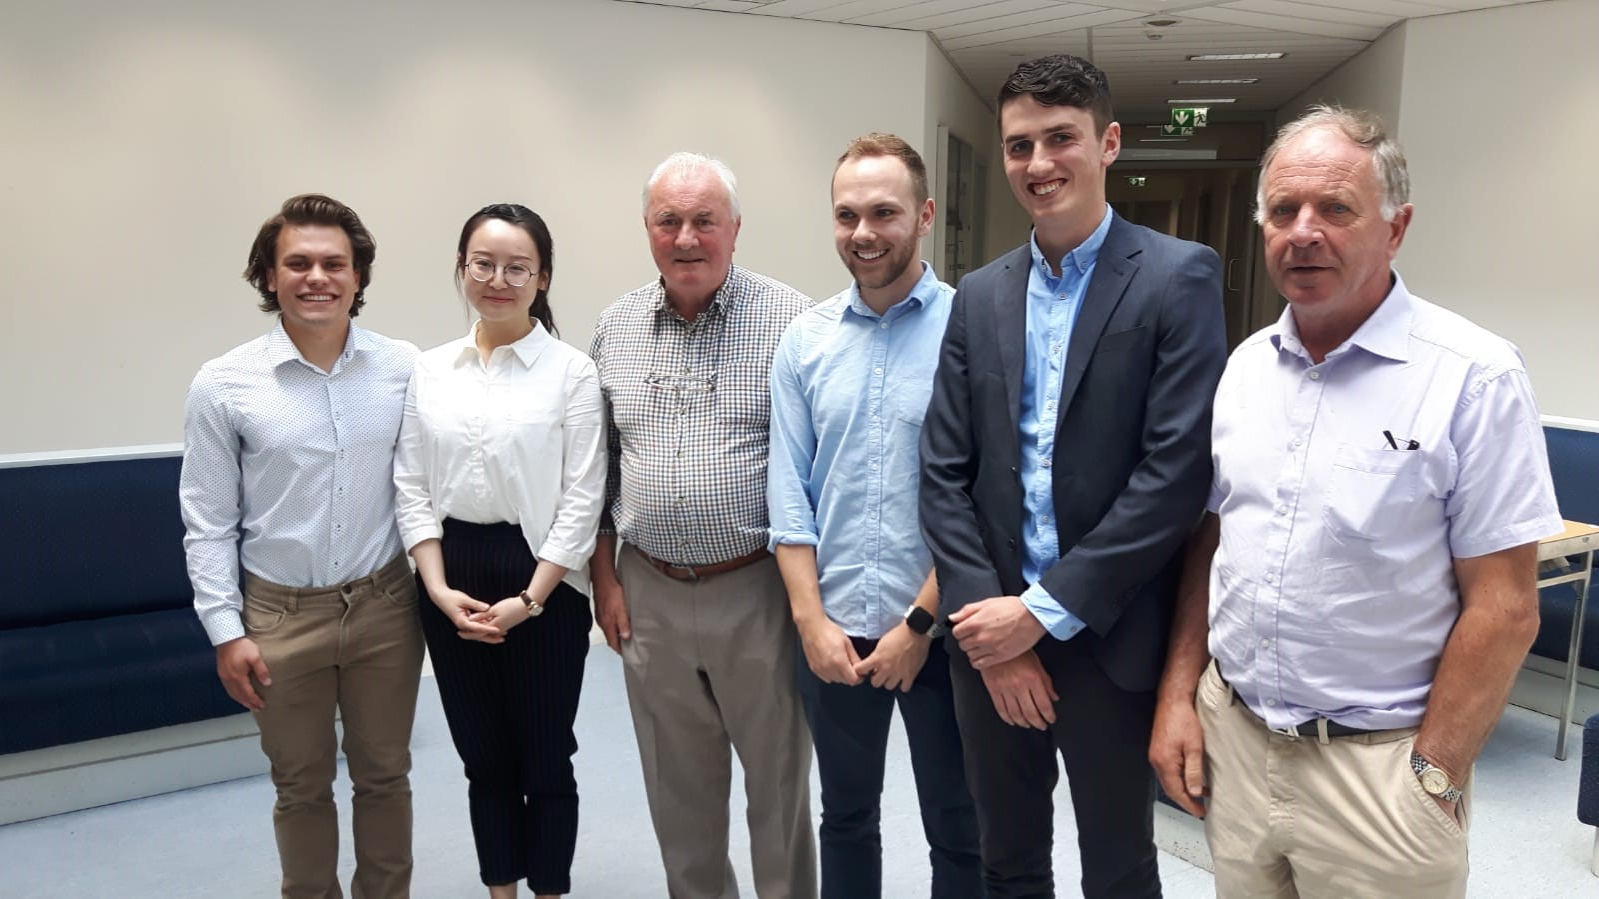 From the left: Glen O’Driscoll, Sung Xinyu, Michael O’Connor, Gearoid Dineen, Dara O’Leary and Pat O’Connor